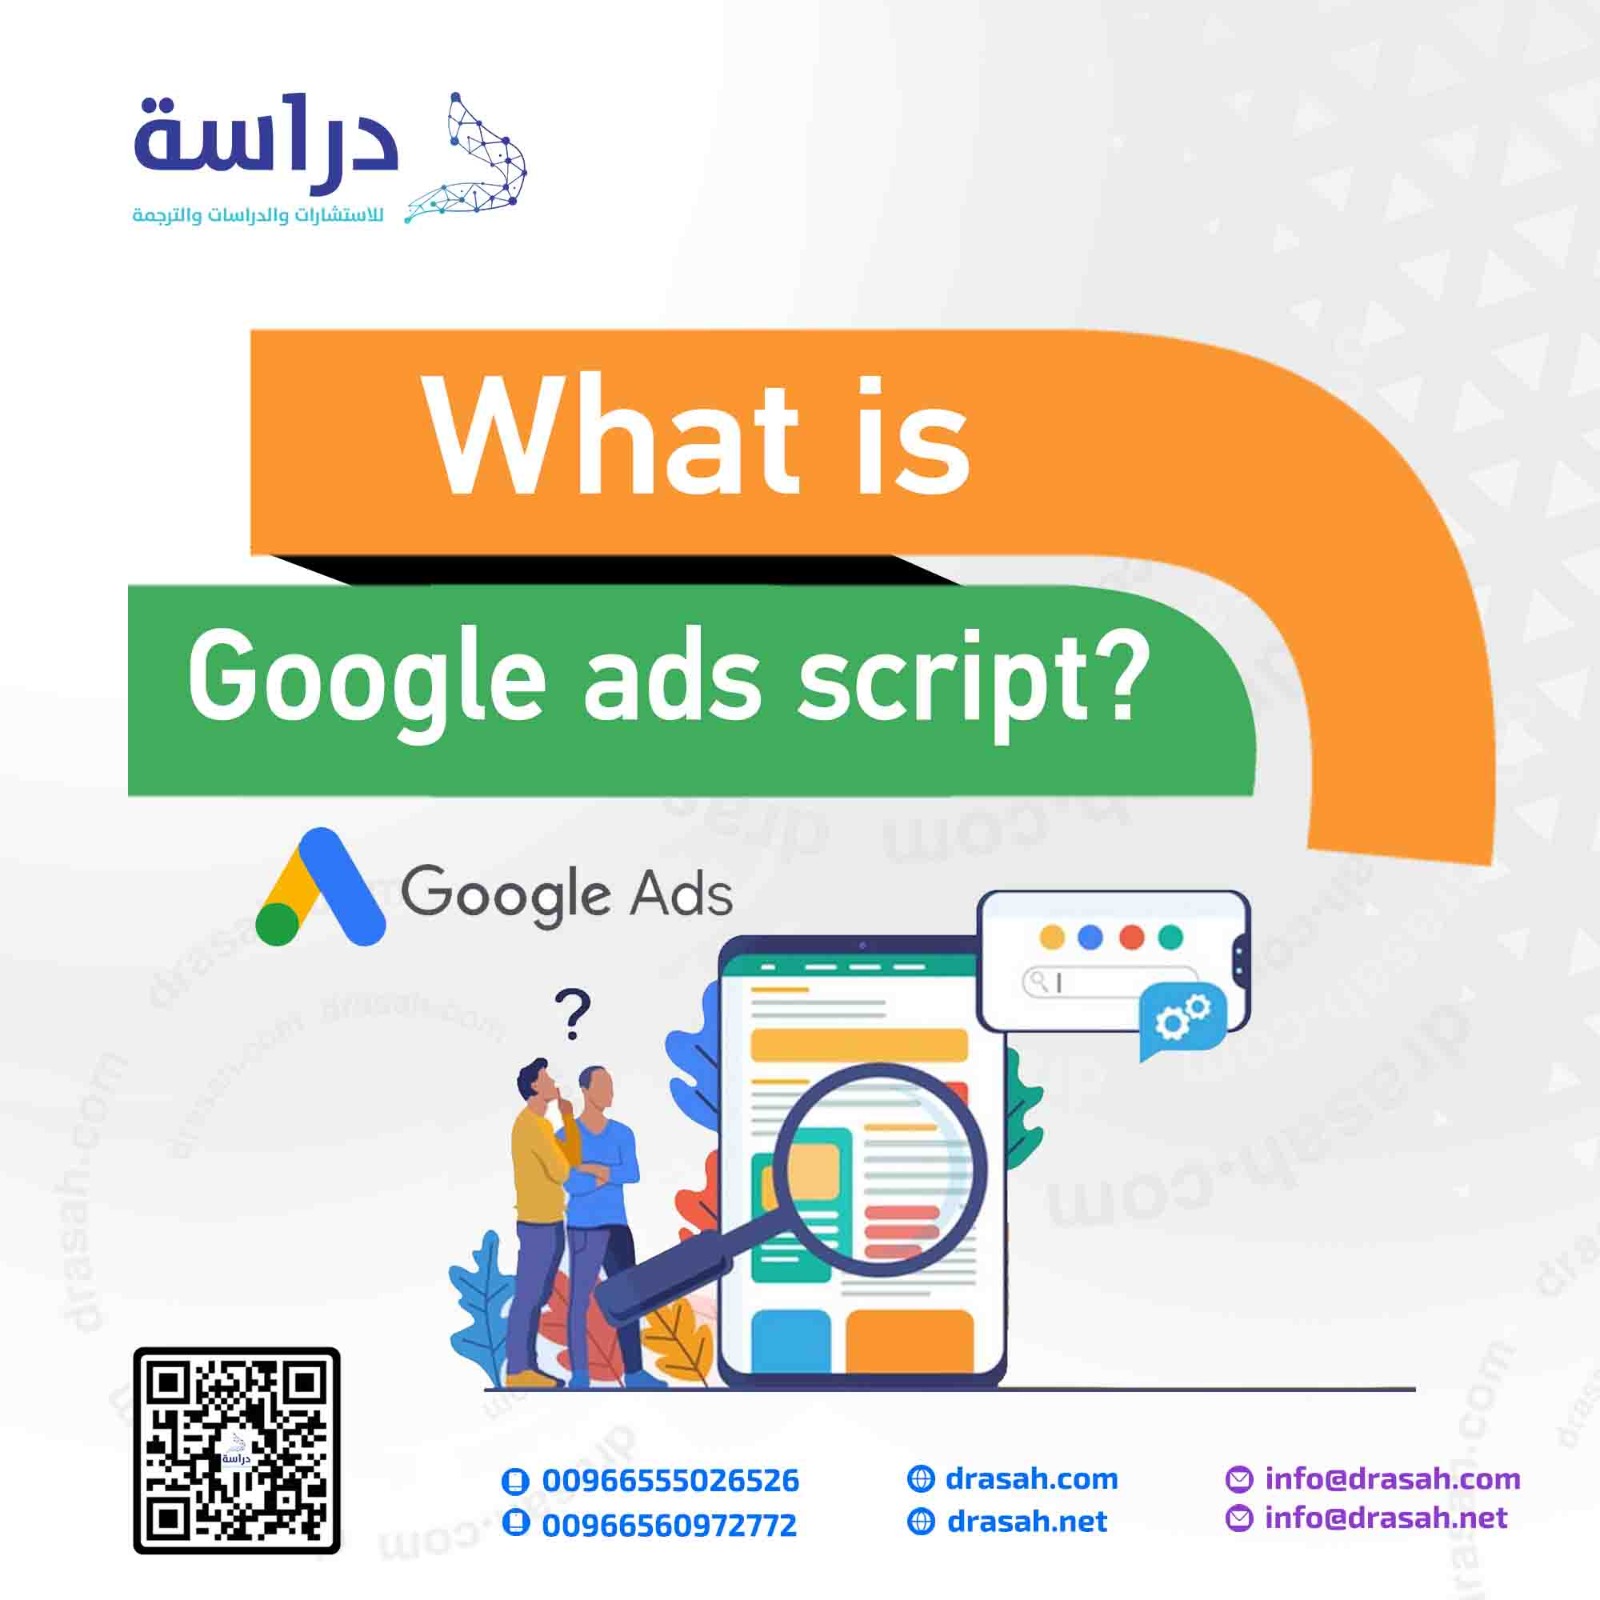 What is Google ads script?